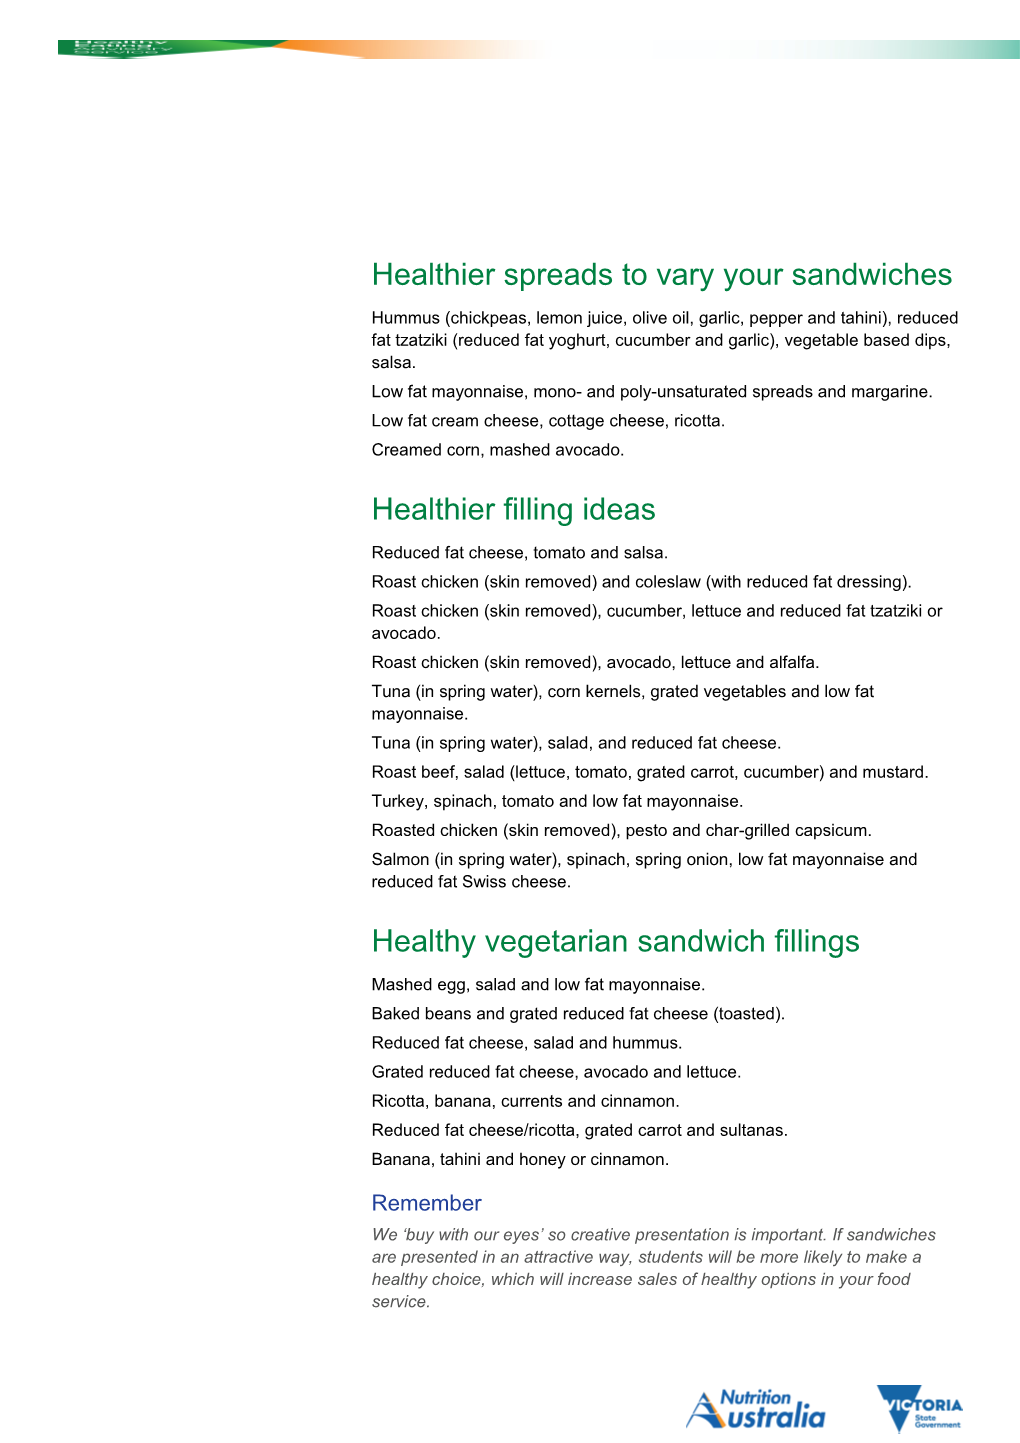 Healthier Spreads to Vary Your Sandwiches